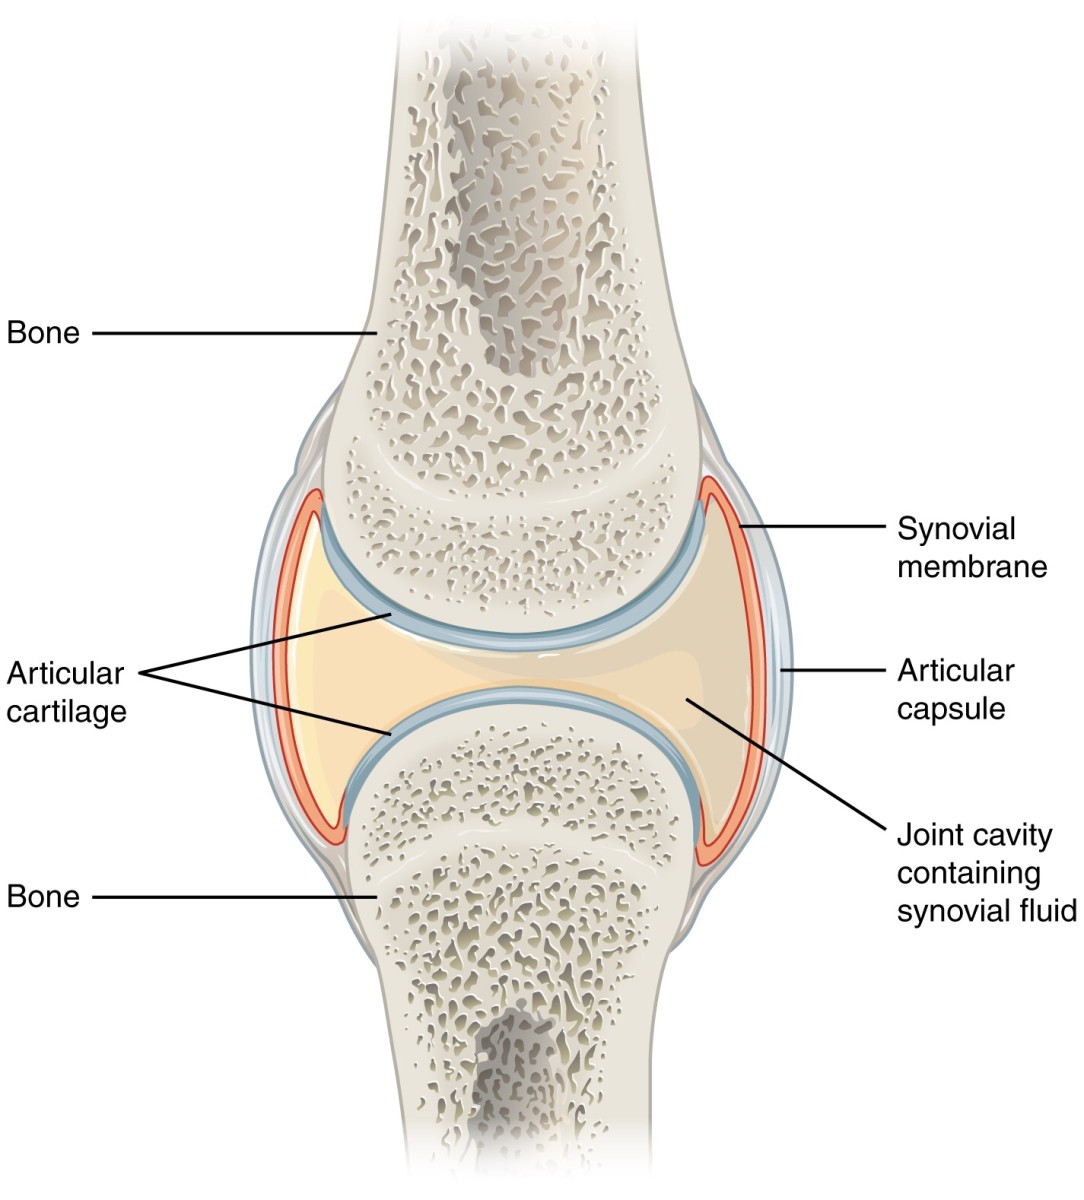 A synovial joint